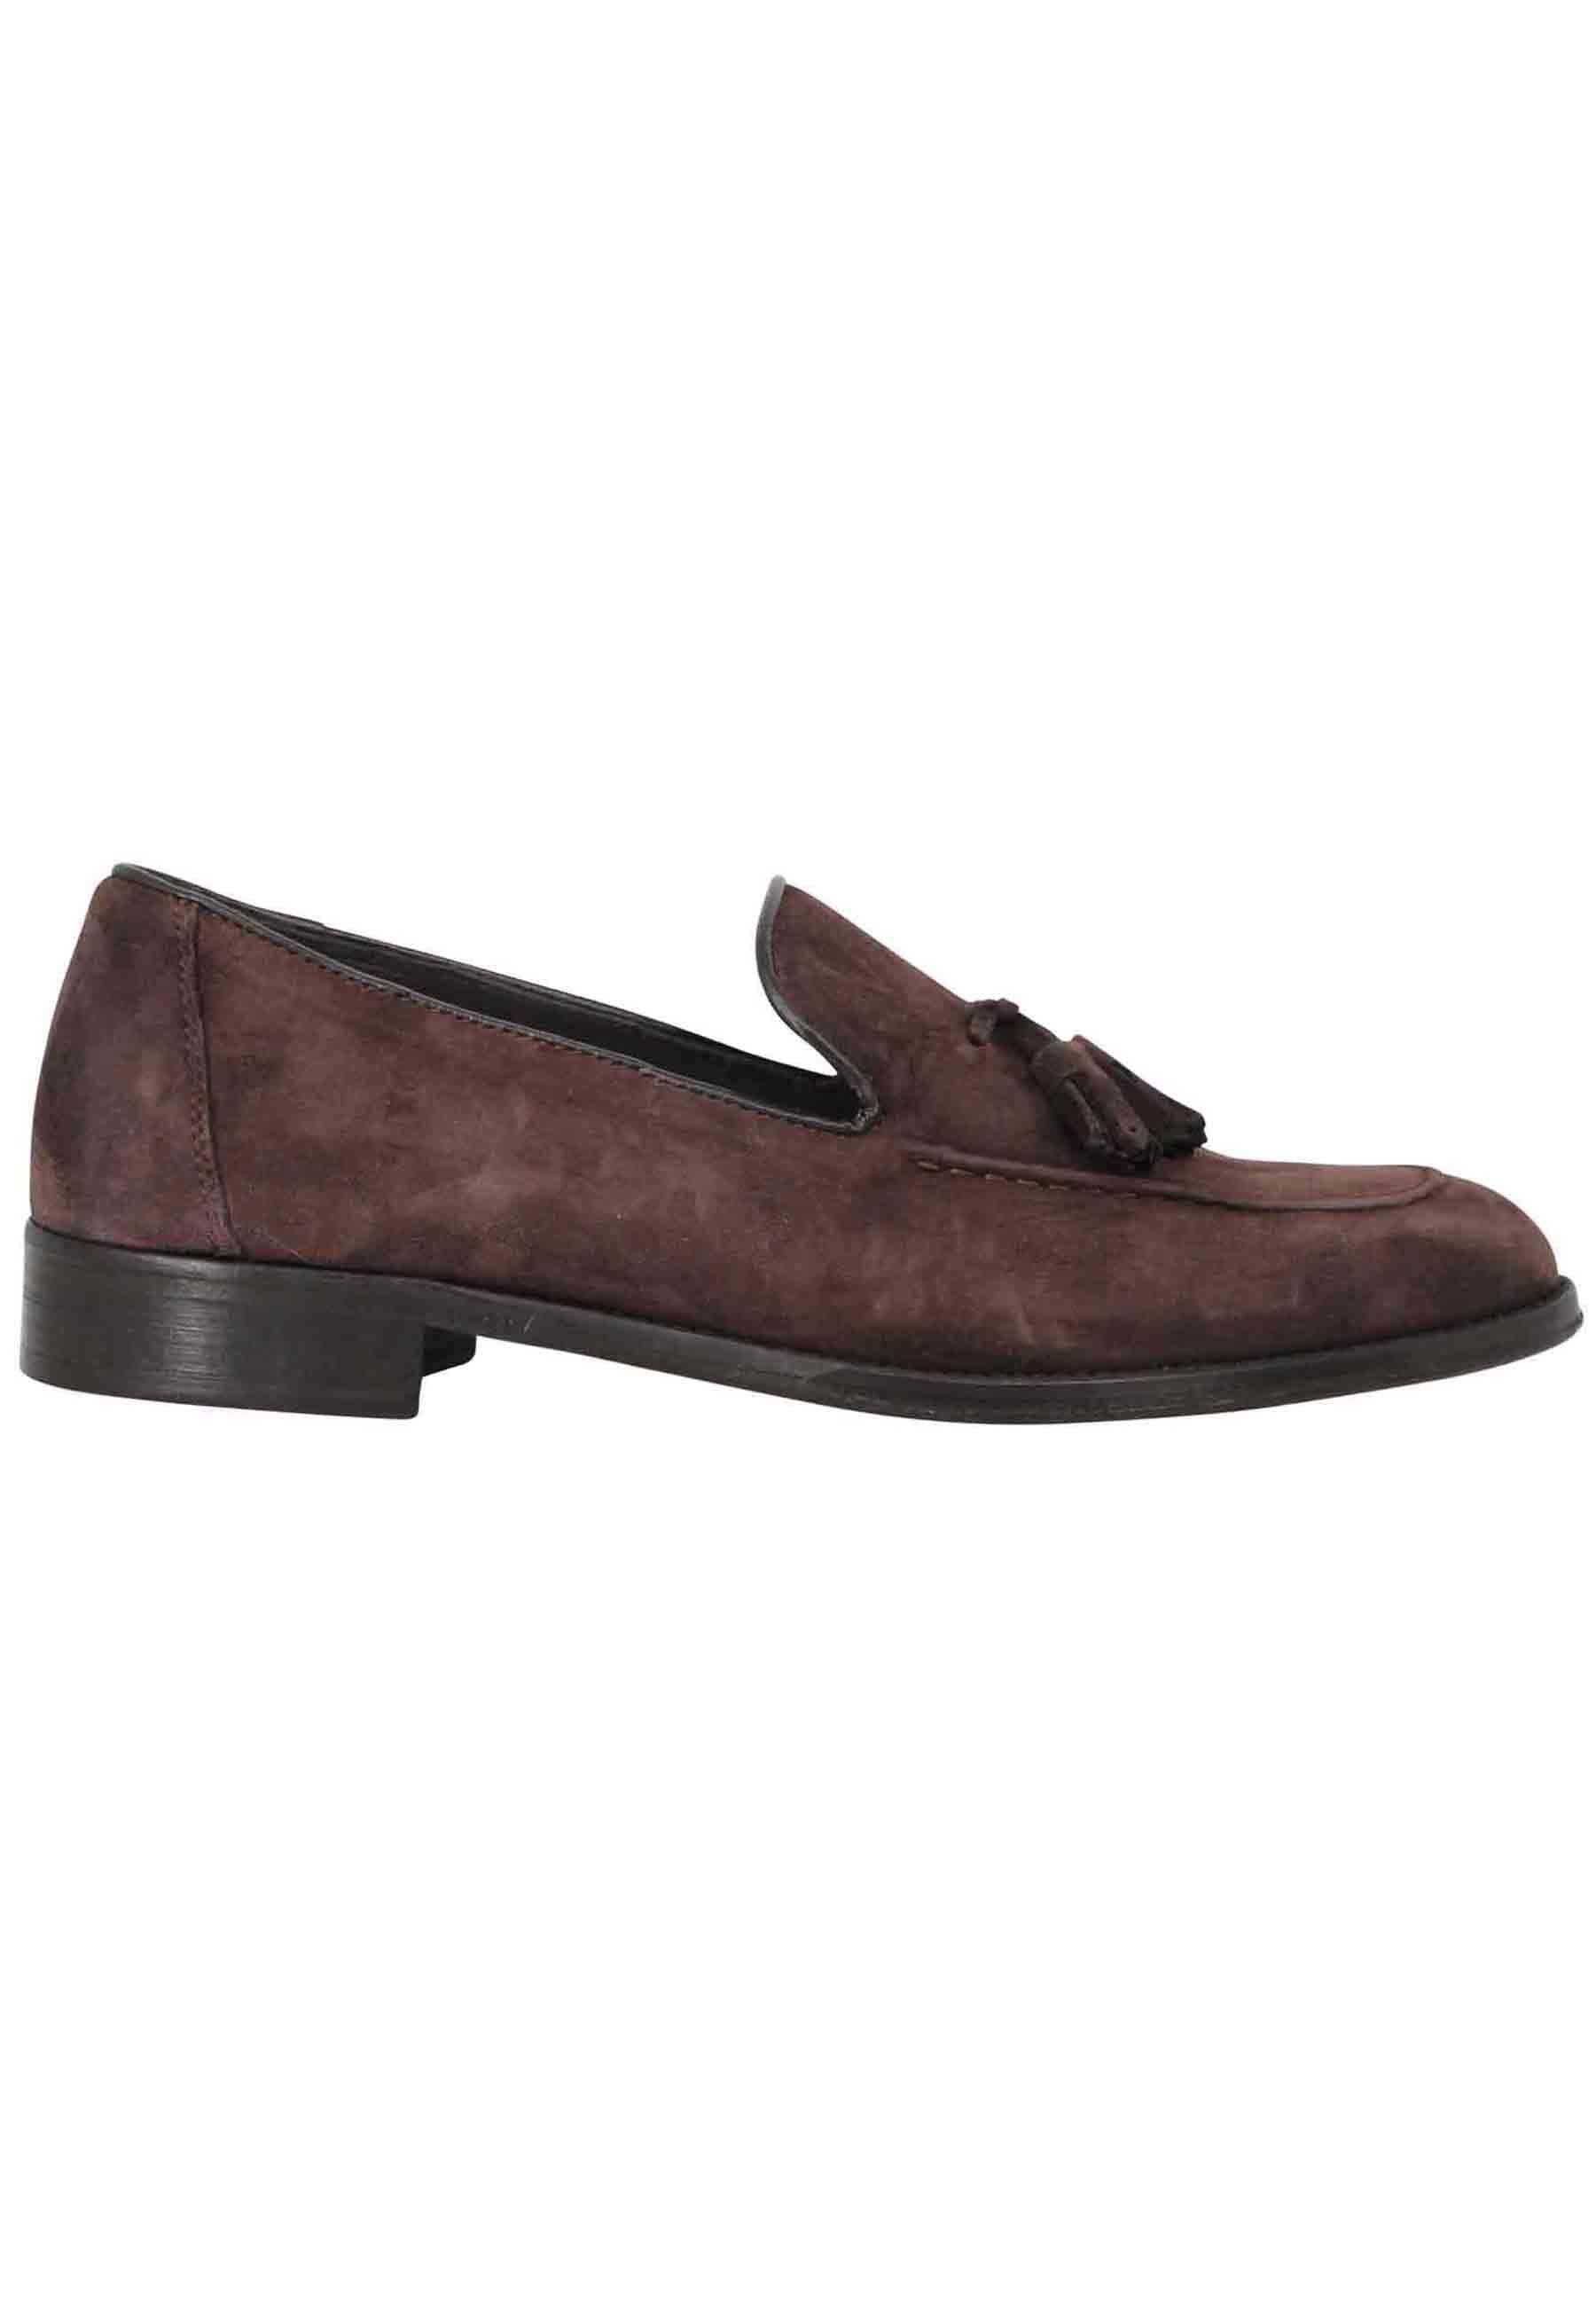 Men's moccasins in dark brown suede with tassels and stitched leather sole